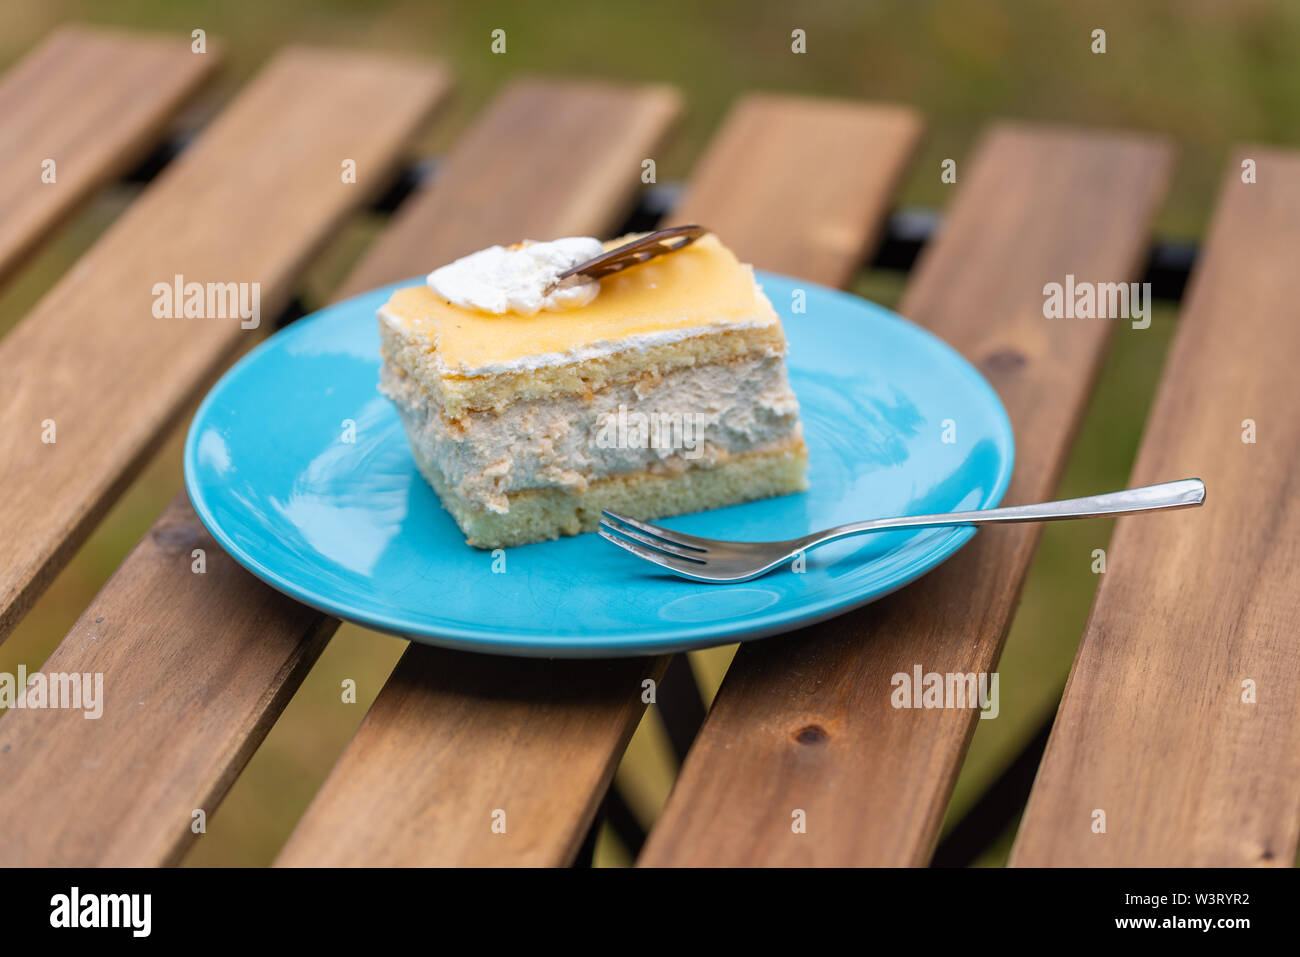 Cream nut cuts on a plate with a fork Stock Photo